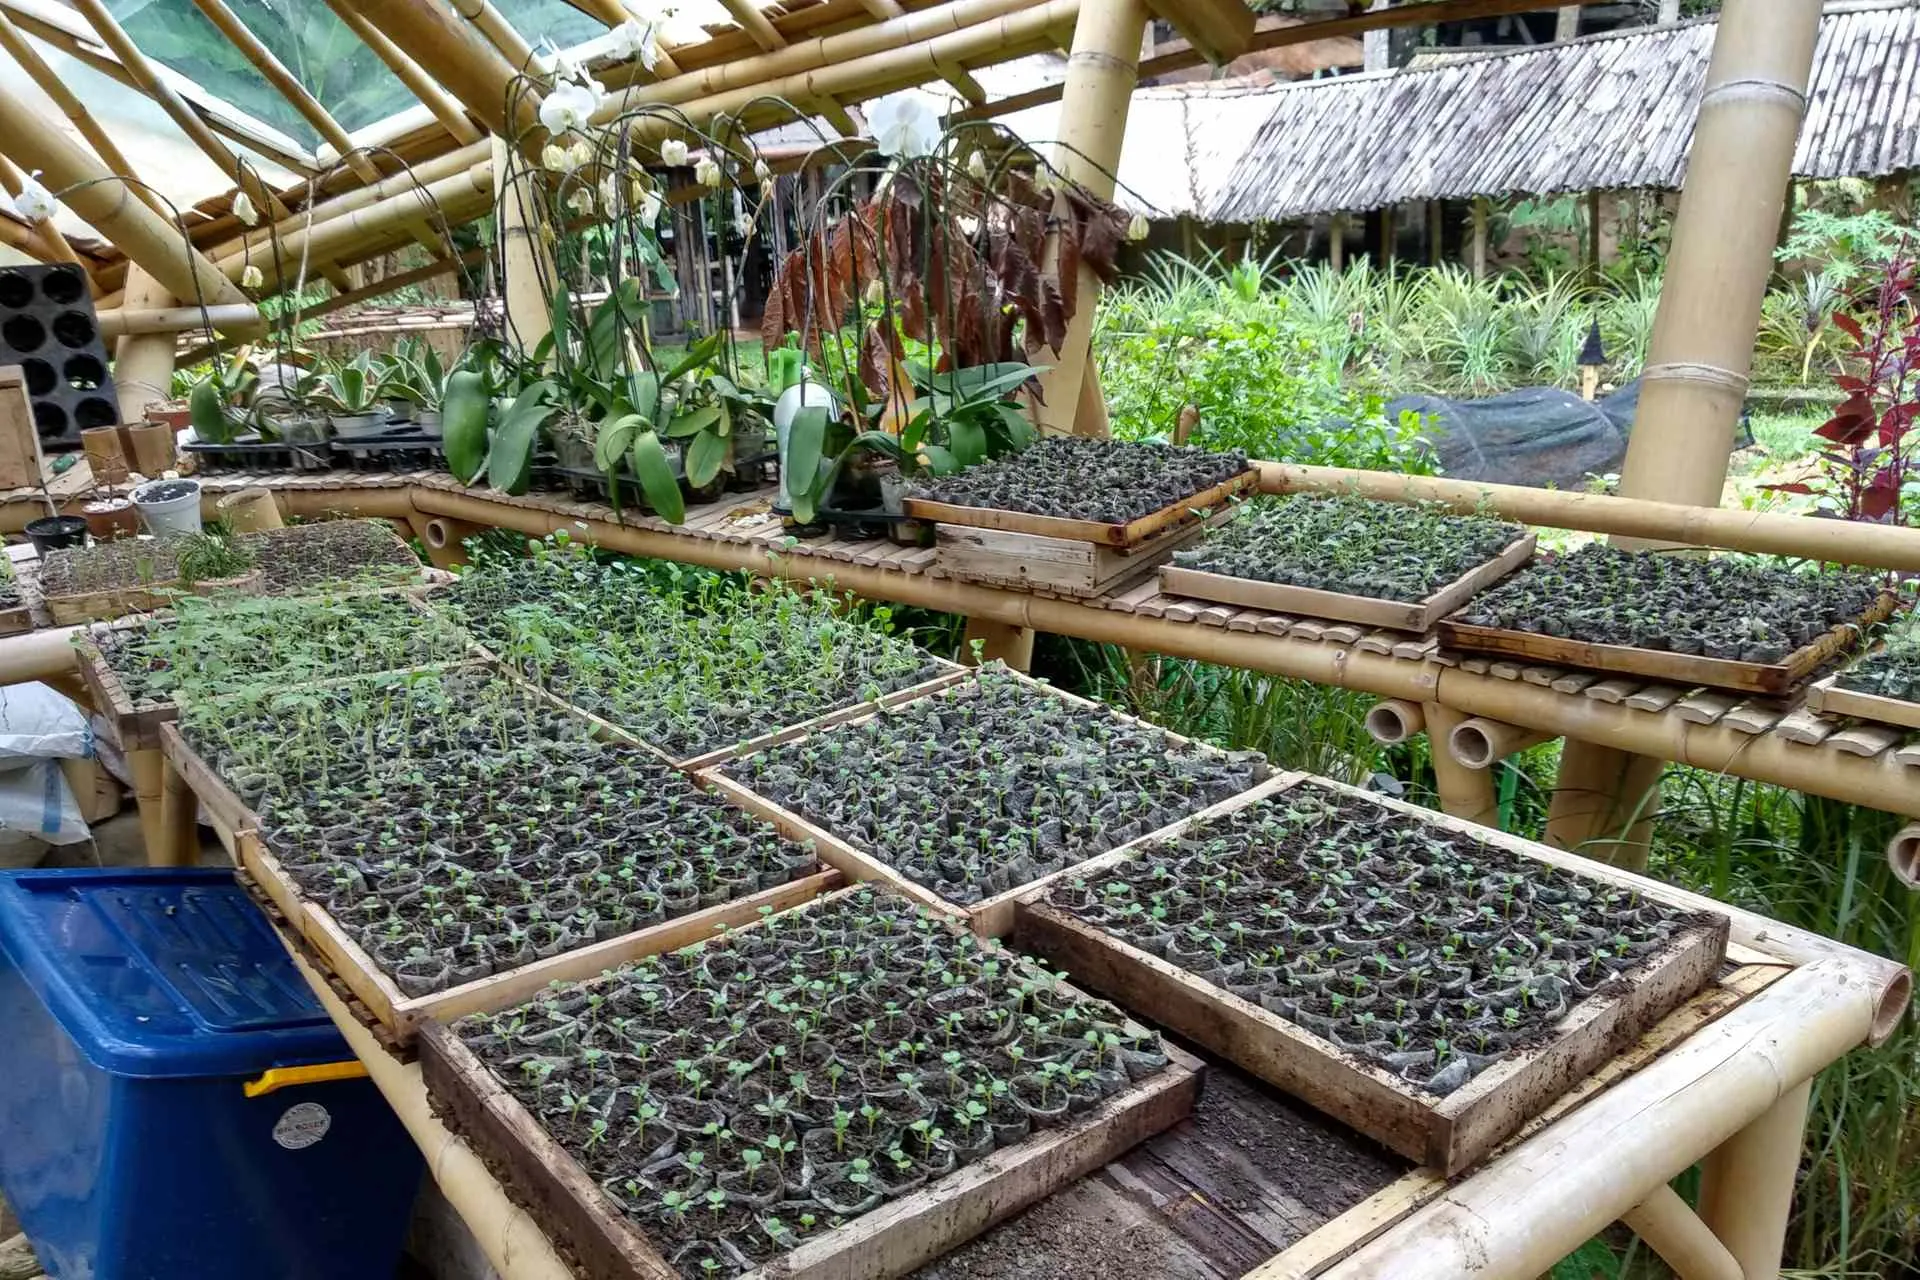 Organic Vegetable and Herb Farm run by a team of gardeners. Photo by Rokma